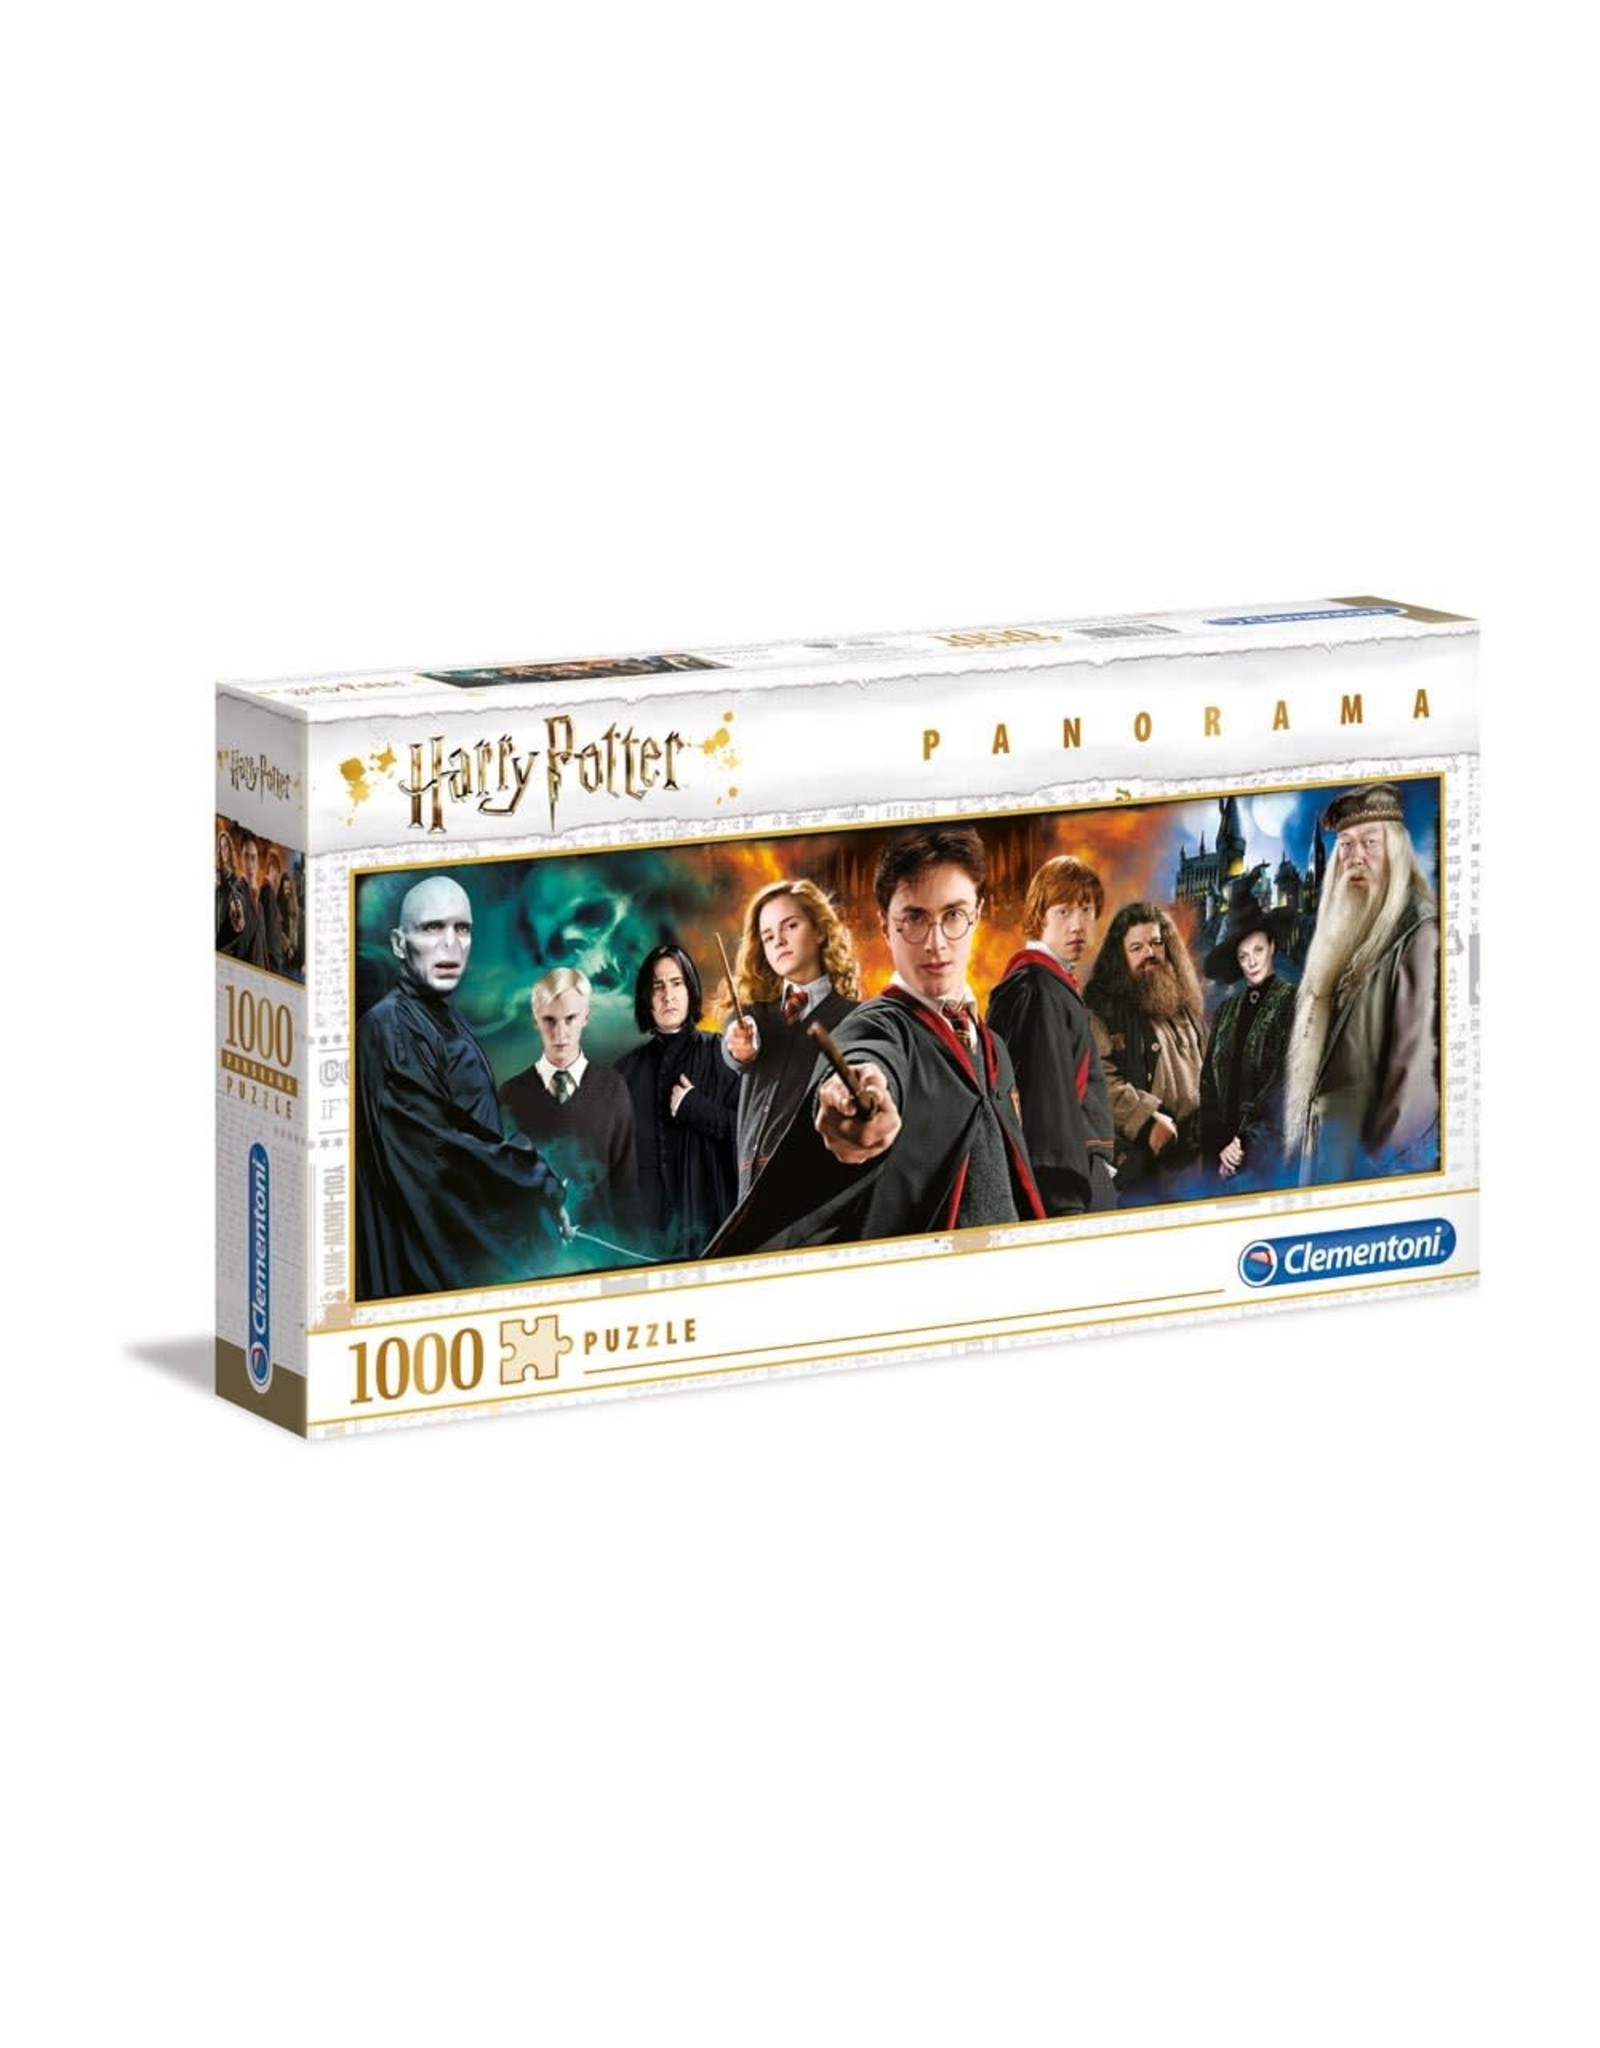 Clementoni HARRY POTTER Panorama Puzzle 1000P - Characters